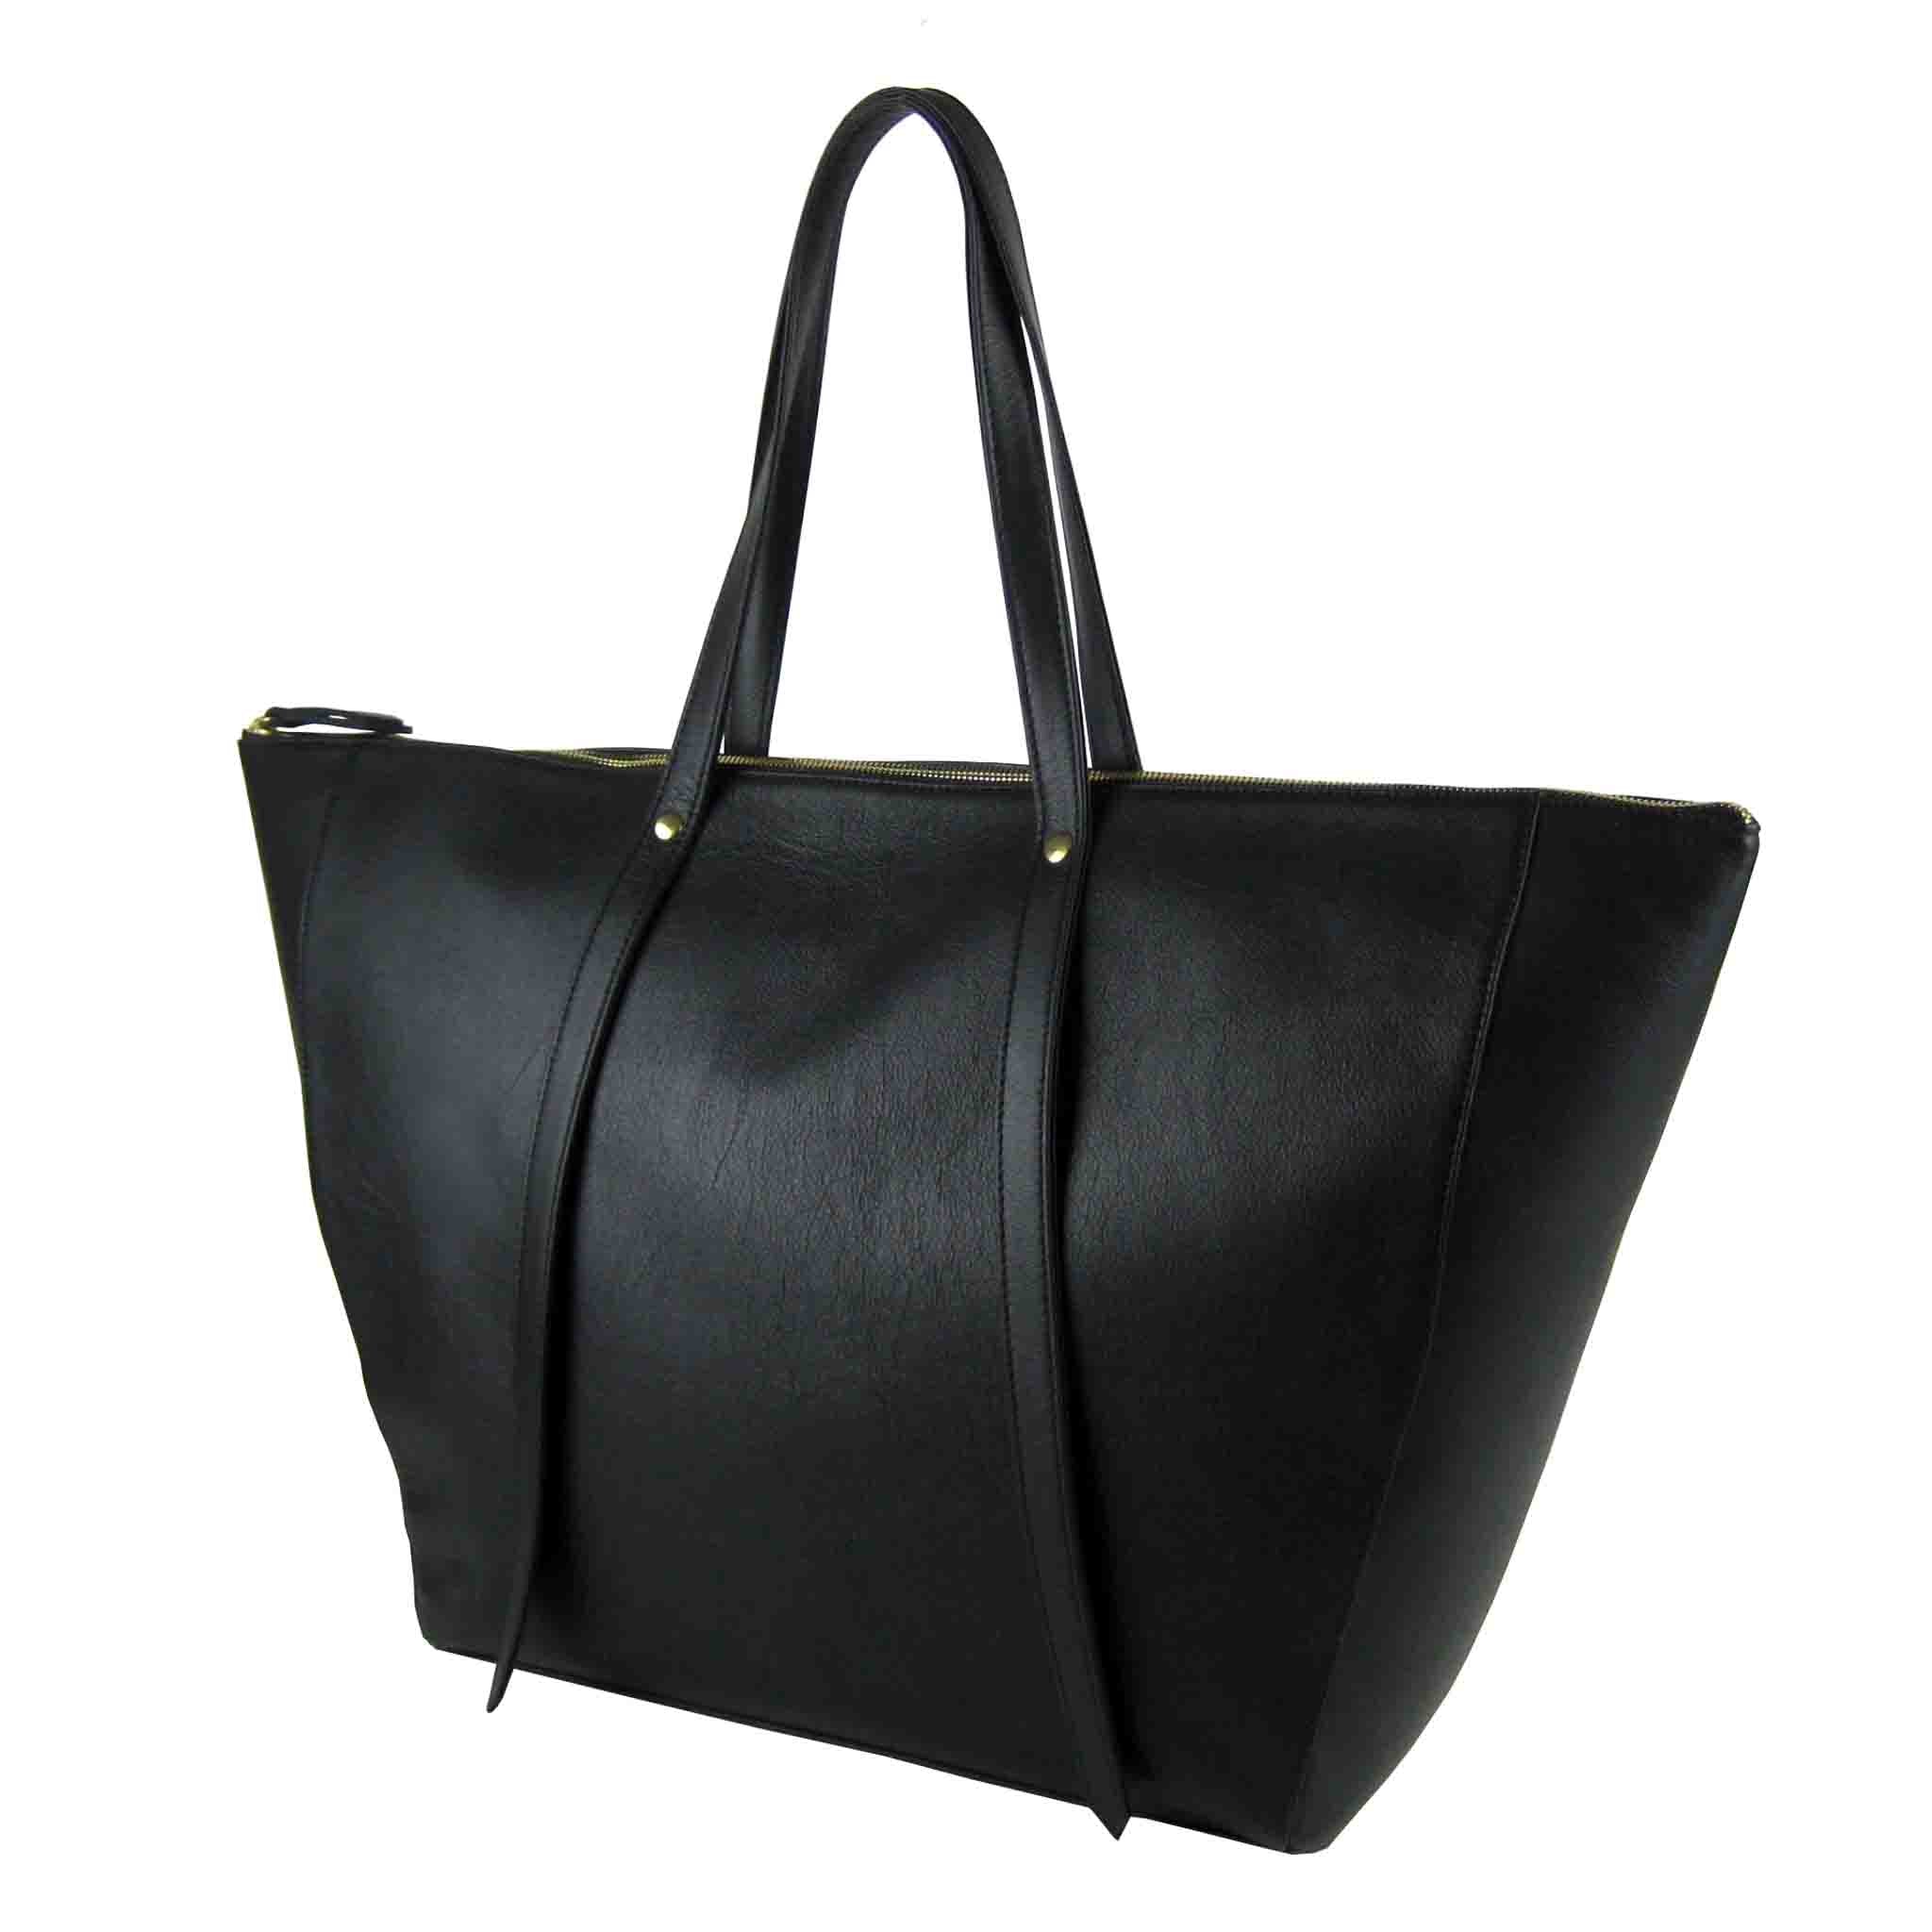 BLACK LEATHER TOTE WOMEN'S BAG KAUFER